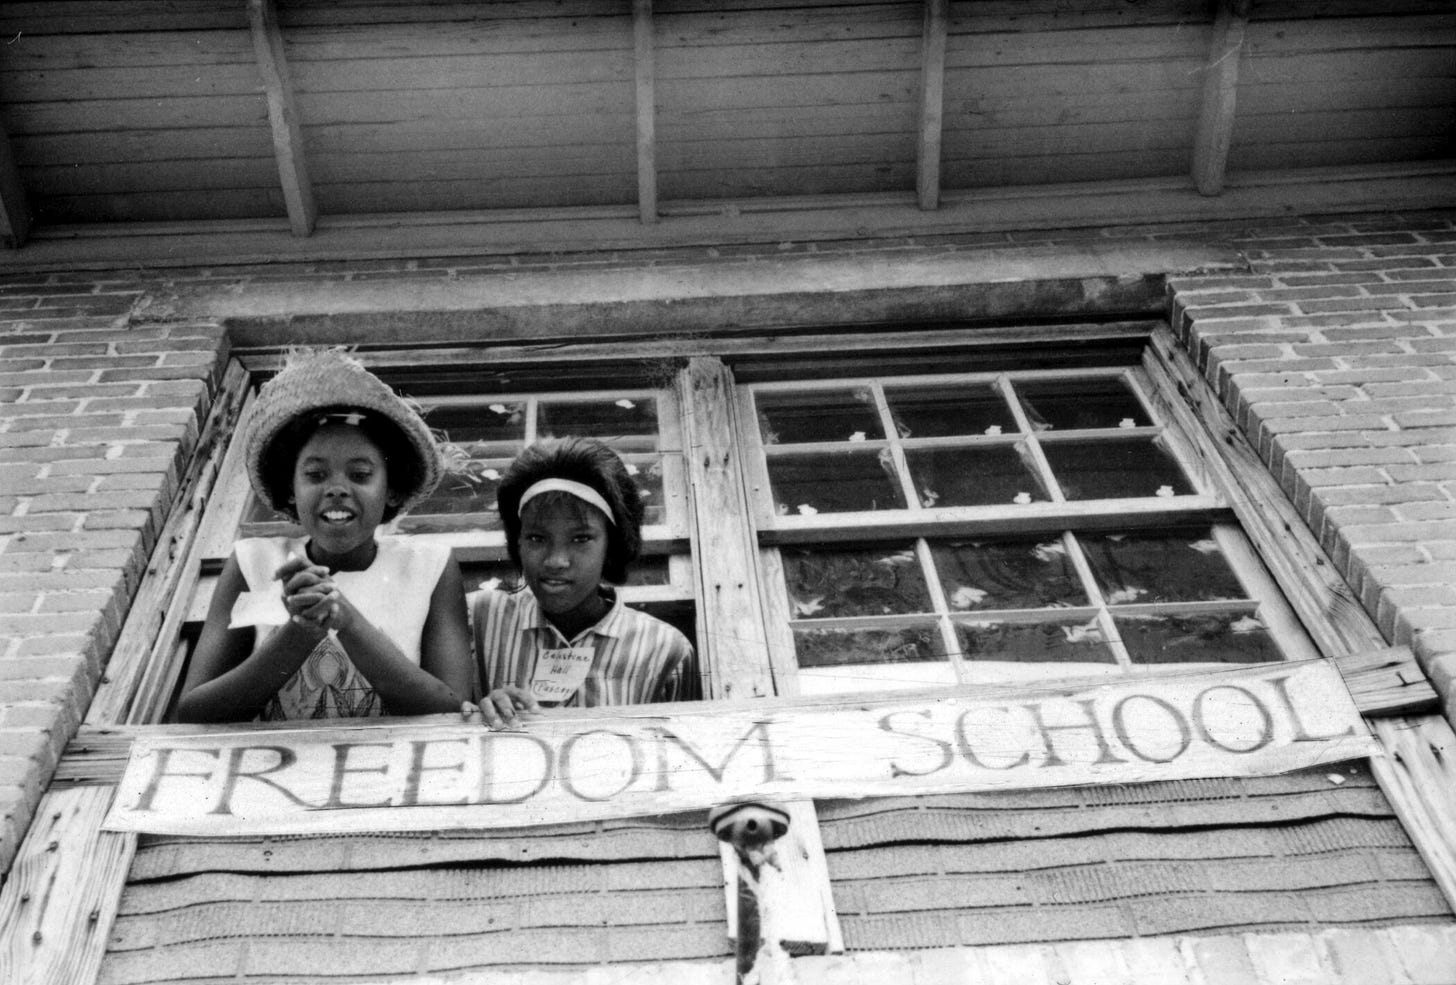 Two girls look out the window of a “Freedom School.”